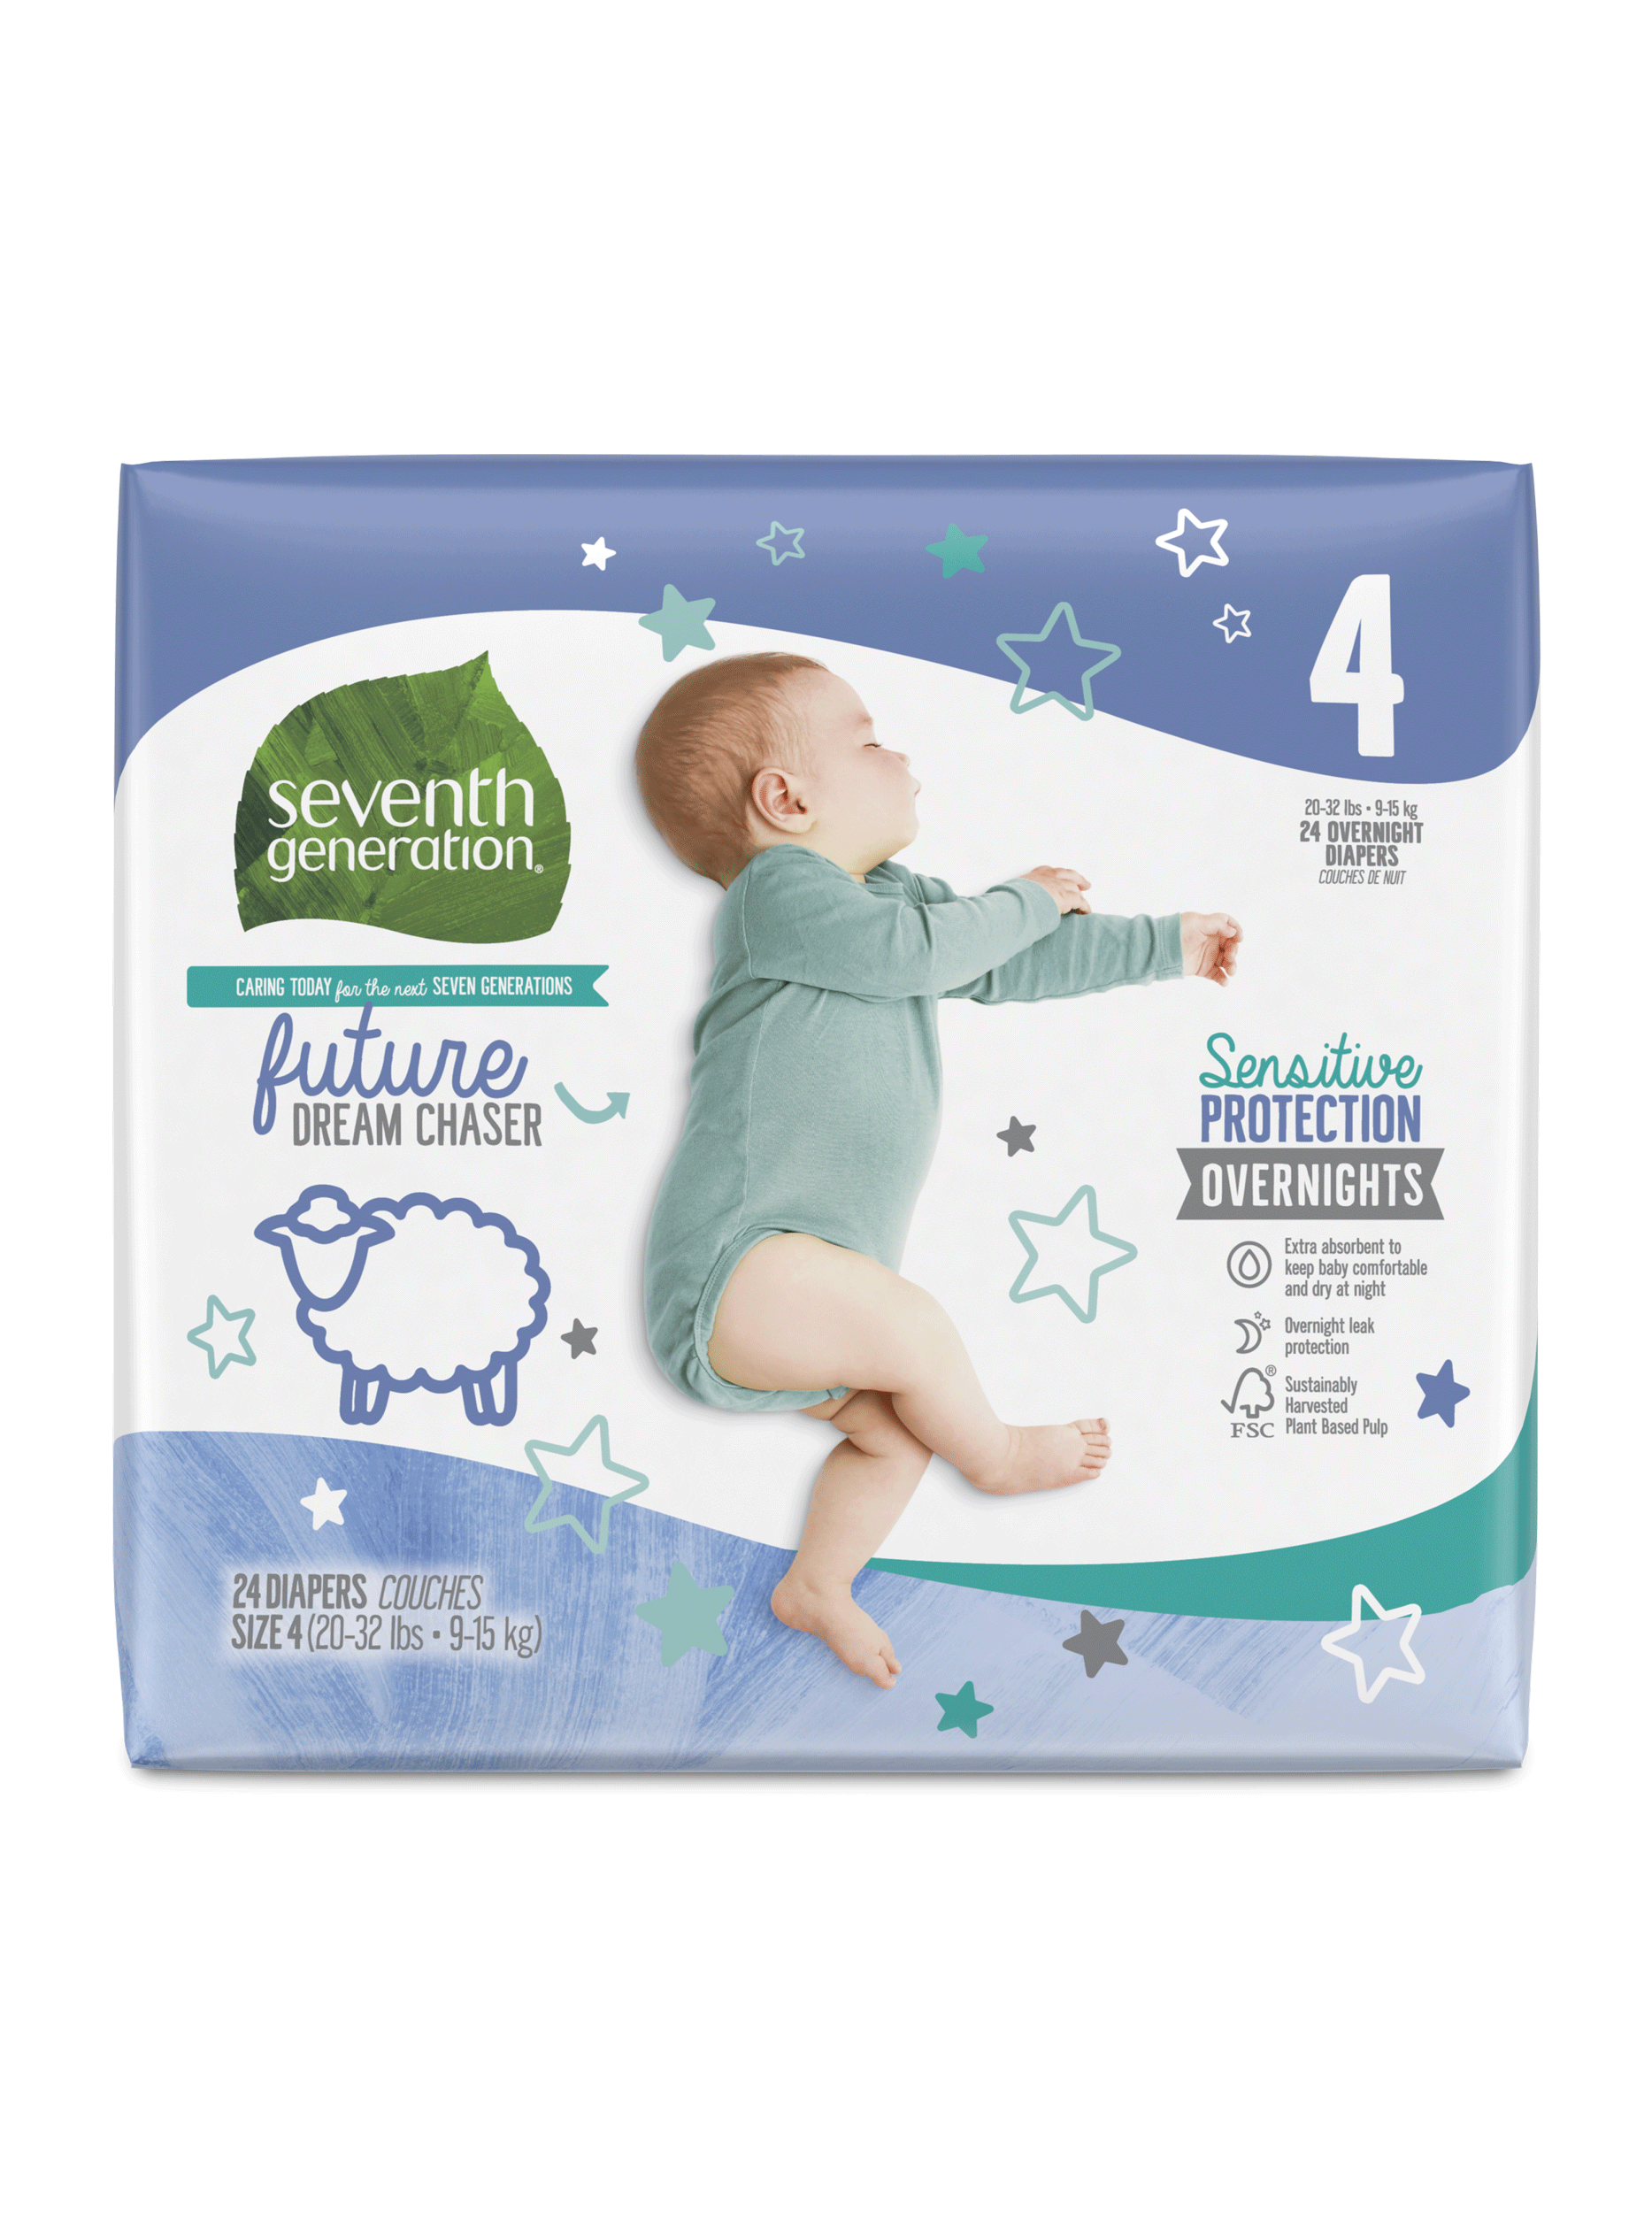 Size 7 overnight diapers: do they exist?